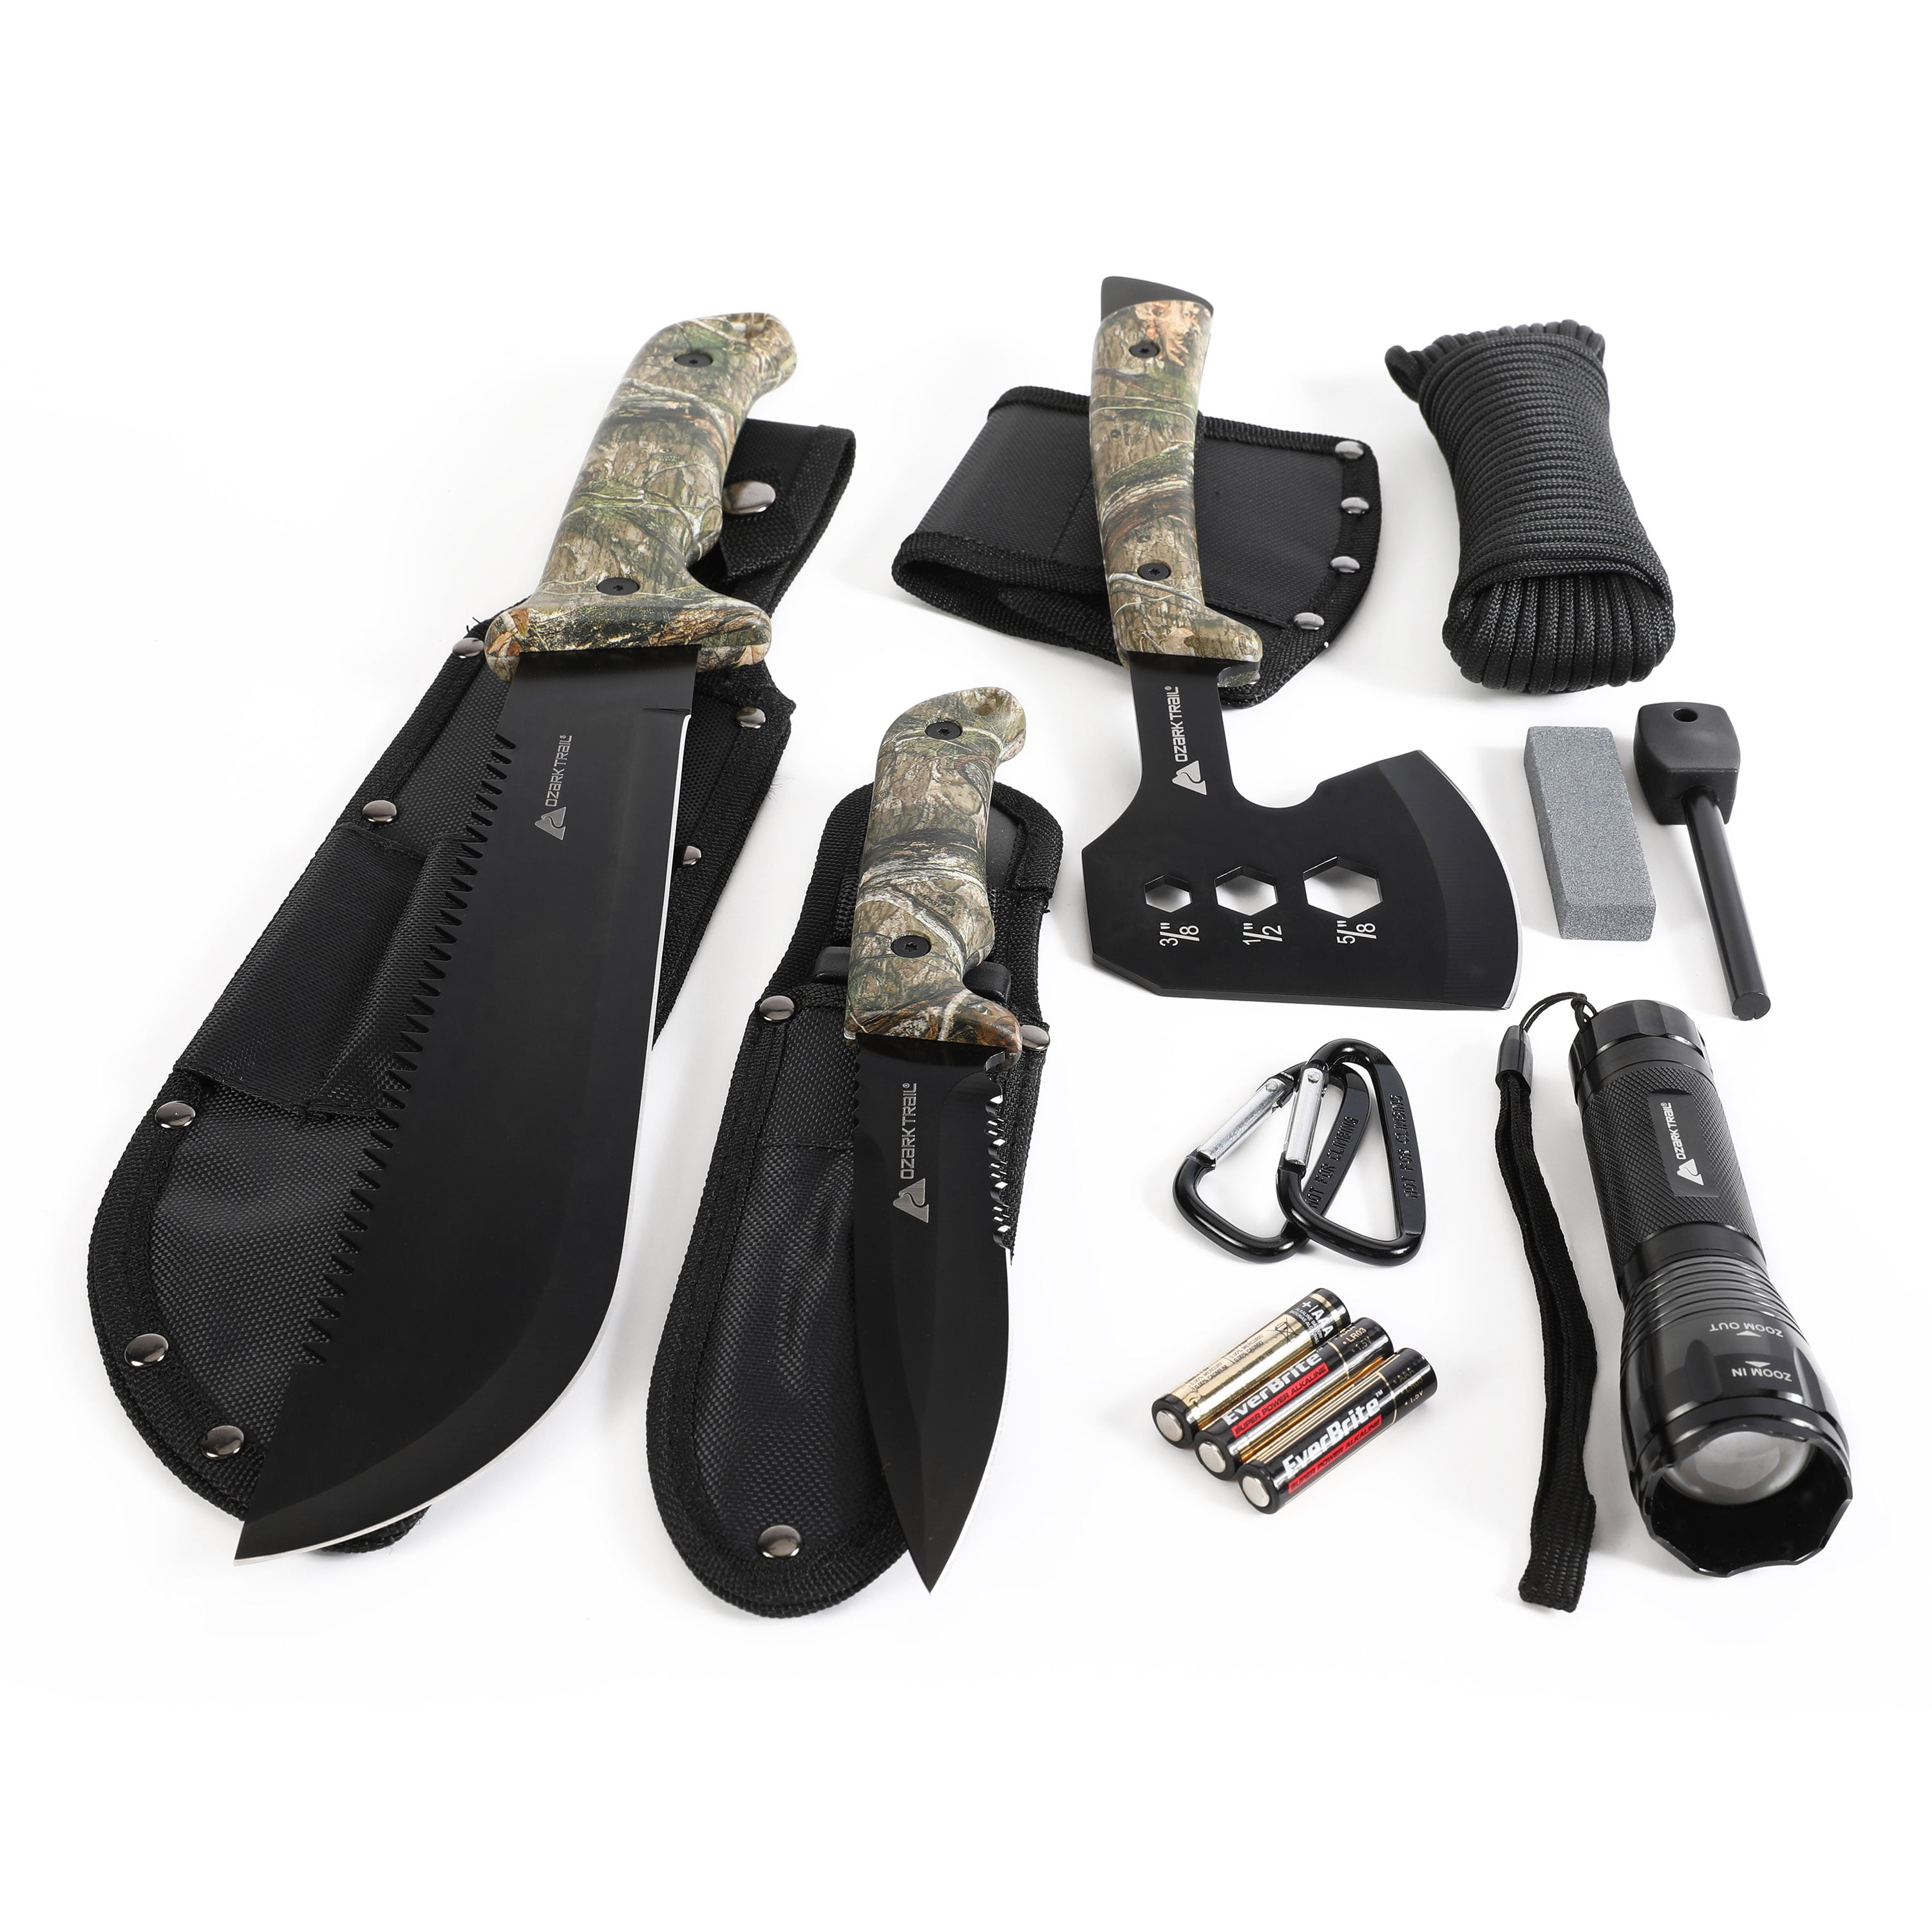 OZARK TRAIL KNIFE 4 Piece Combo Set Stainless Steel $14.98 - PicClick